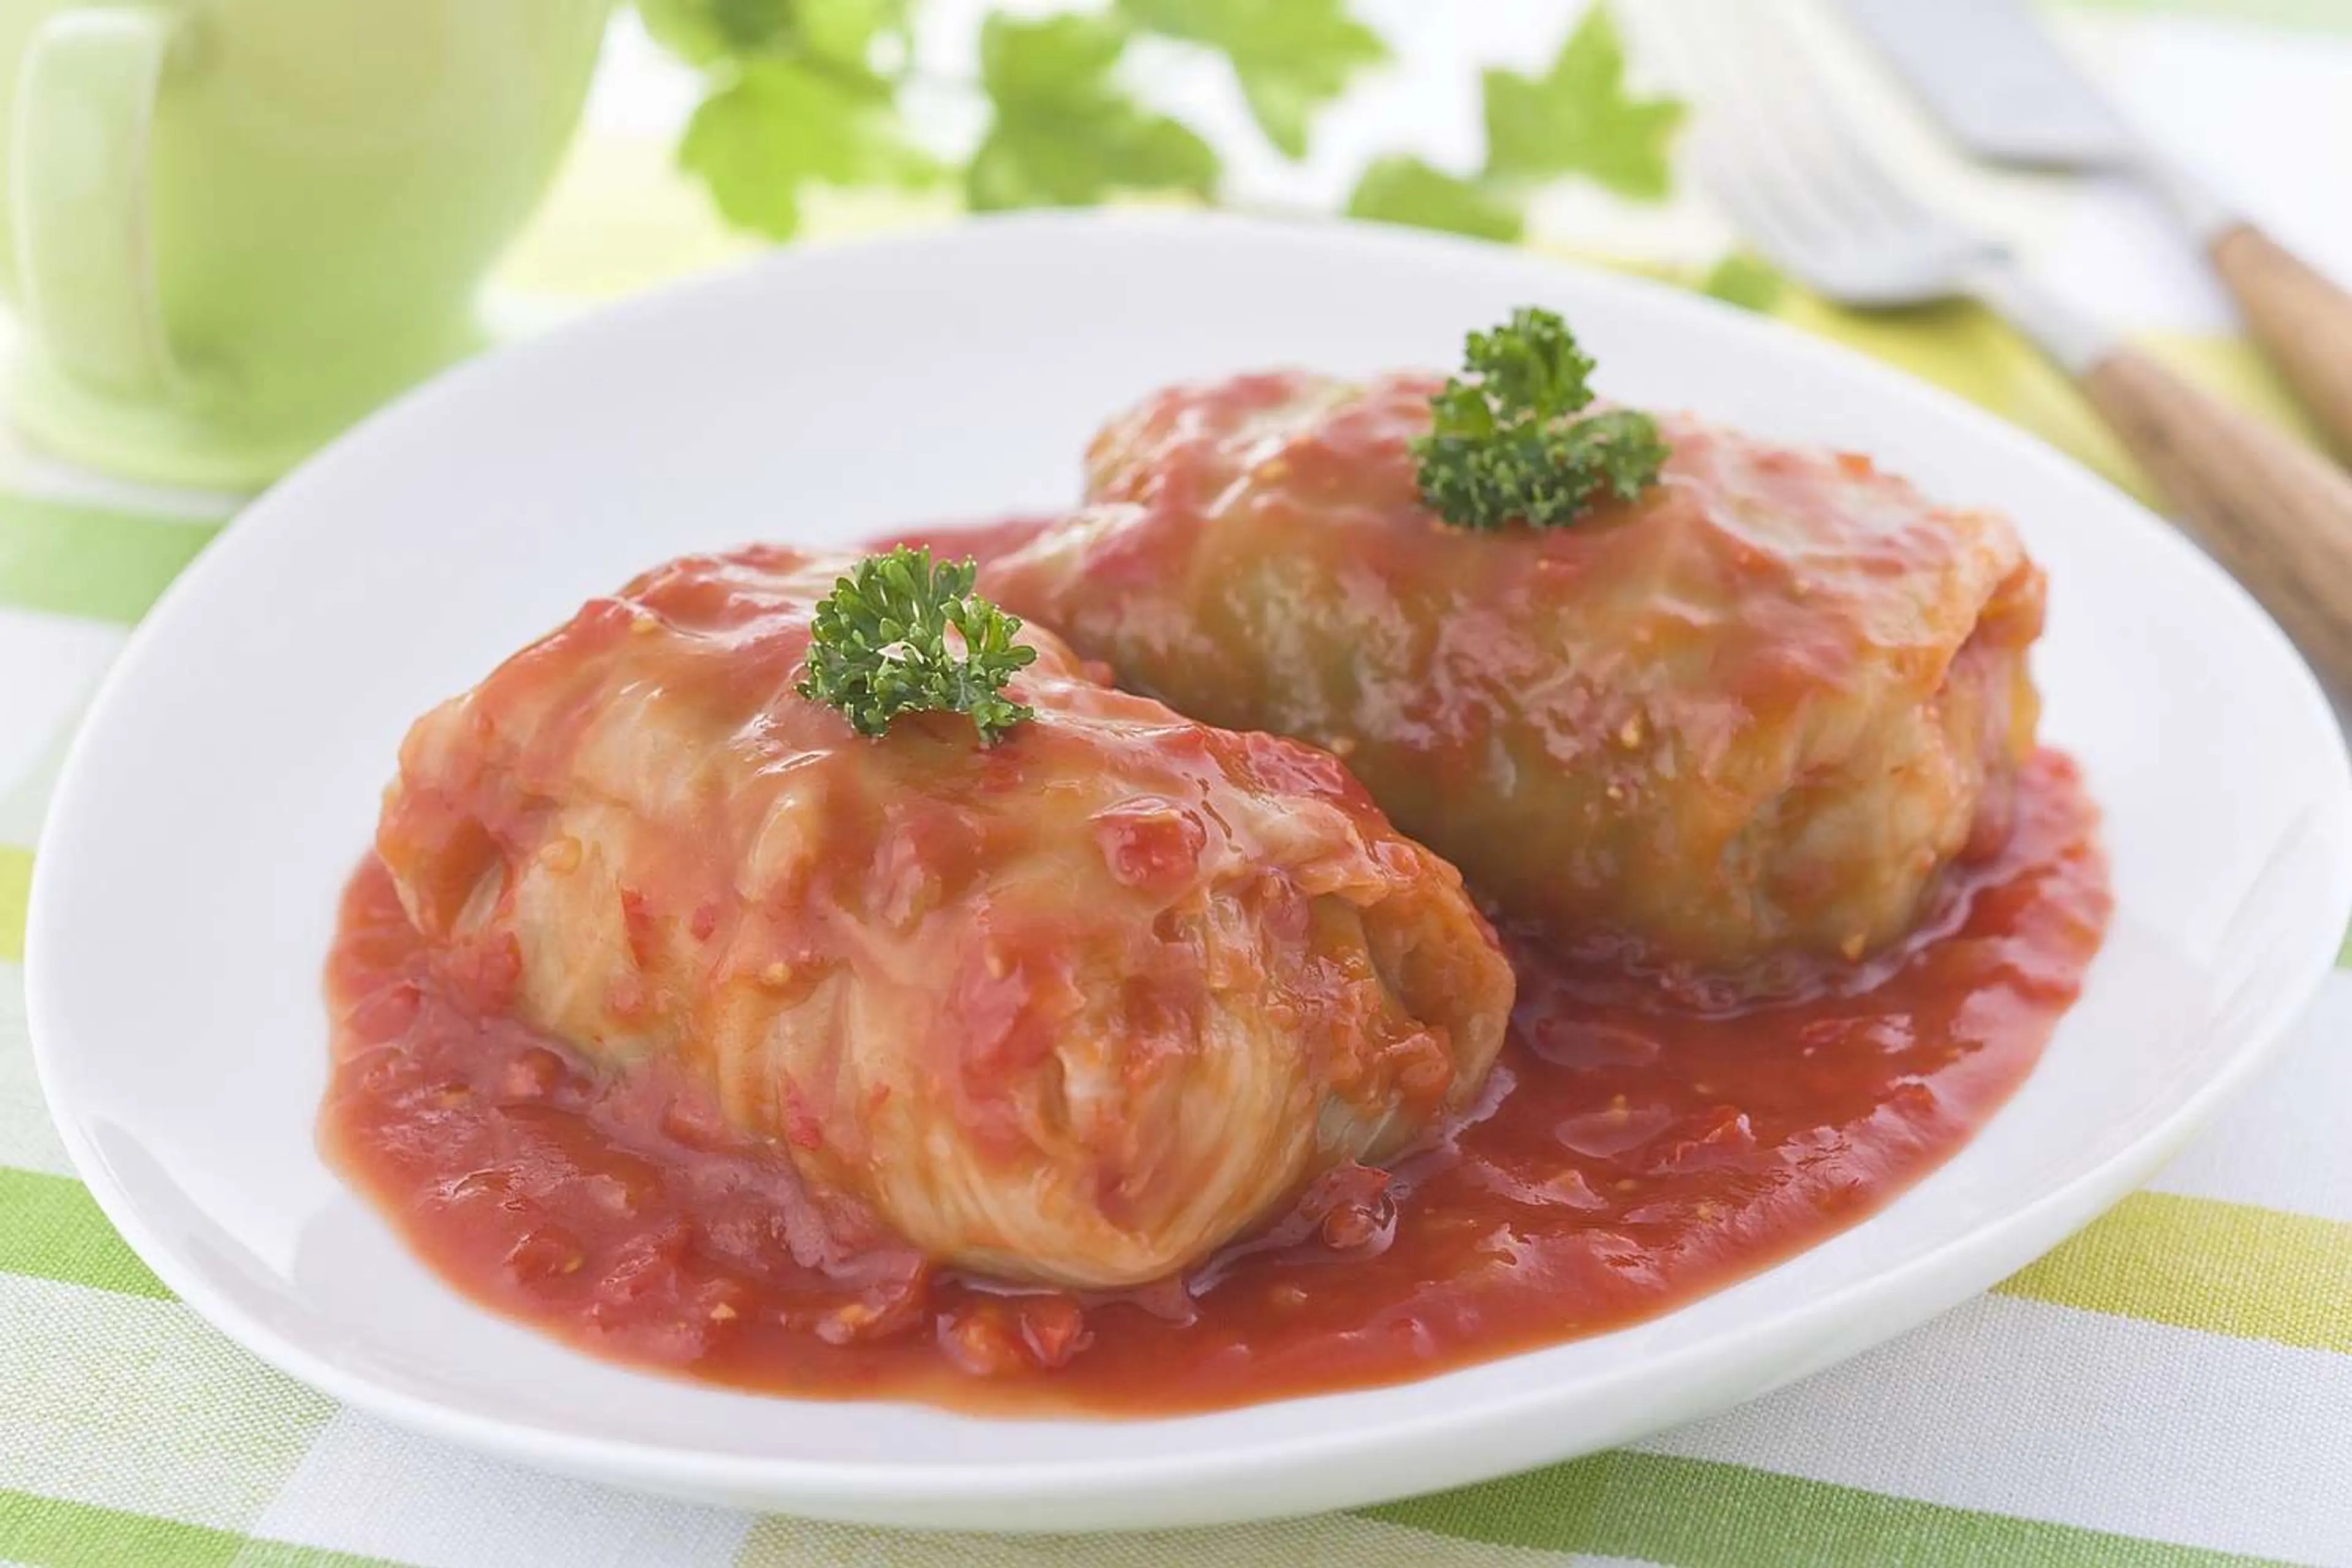 Old-Fashioned Stuffed Cabbage